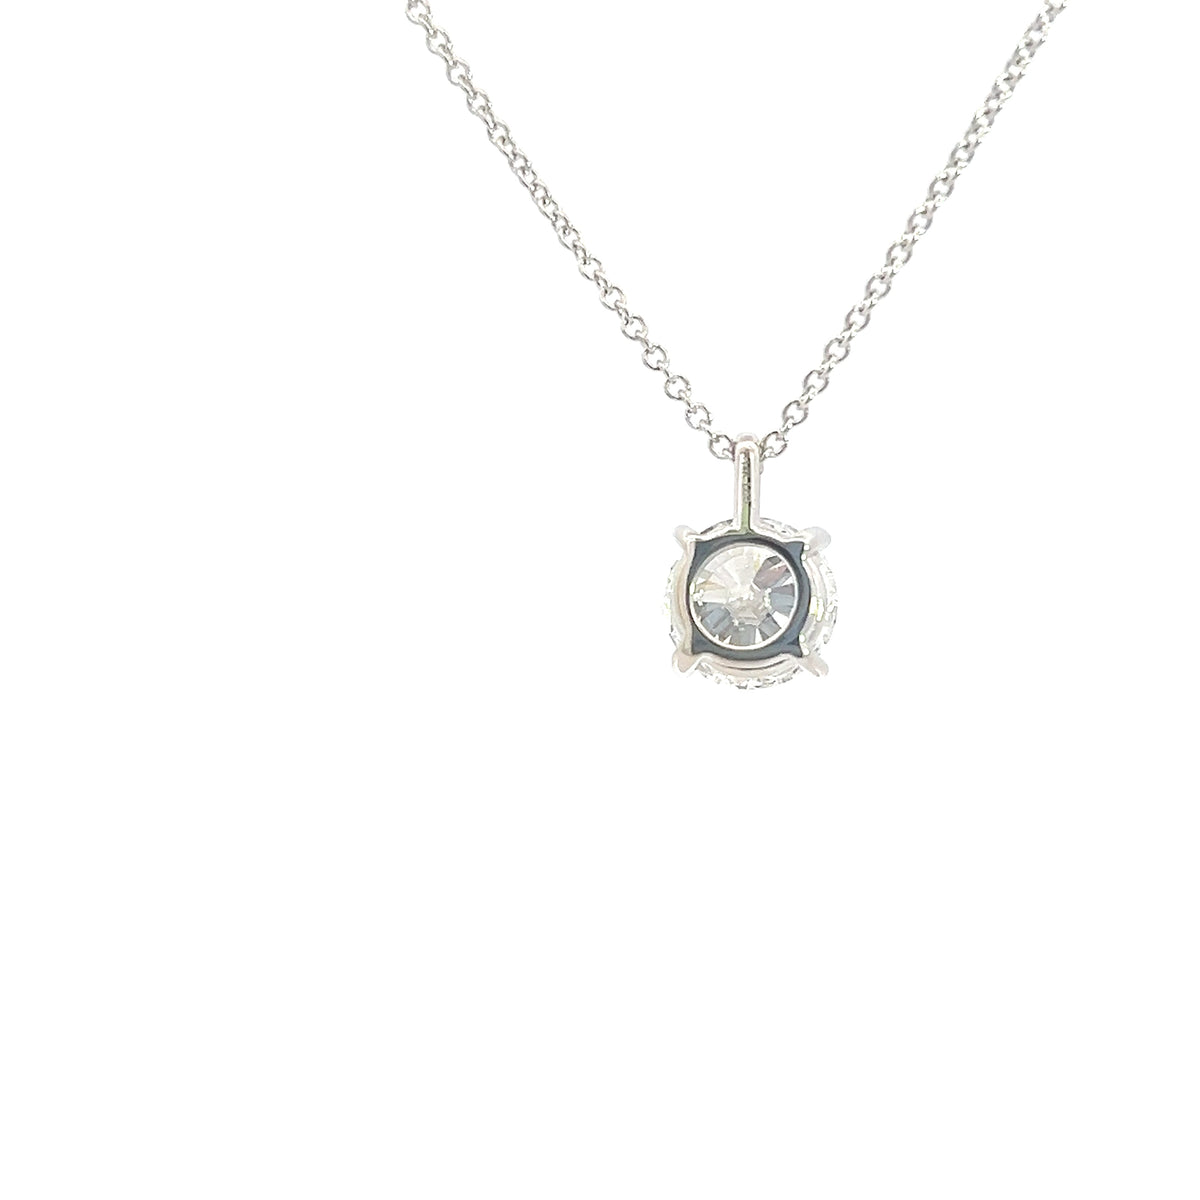 14K White Gold 2.01cttw Lab Grown Diamond Solitaire Necklace with Rolo Chain (Lobster Clasp) - Adjustable 16 - 18 Inches